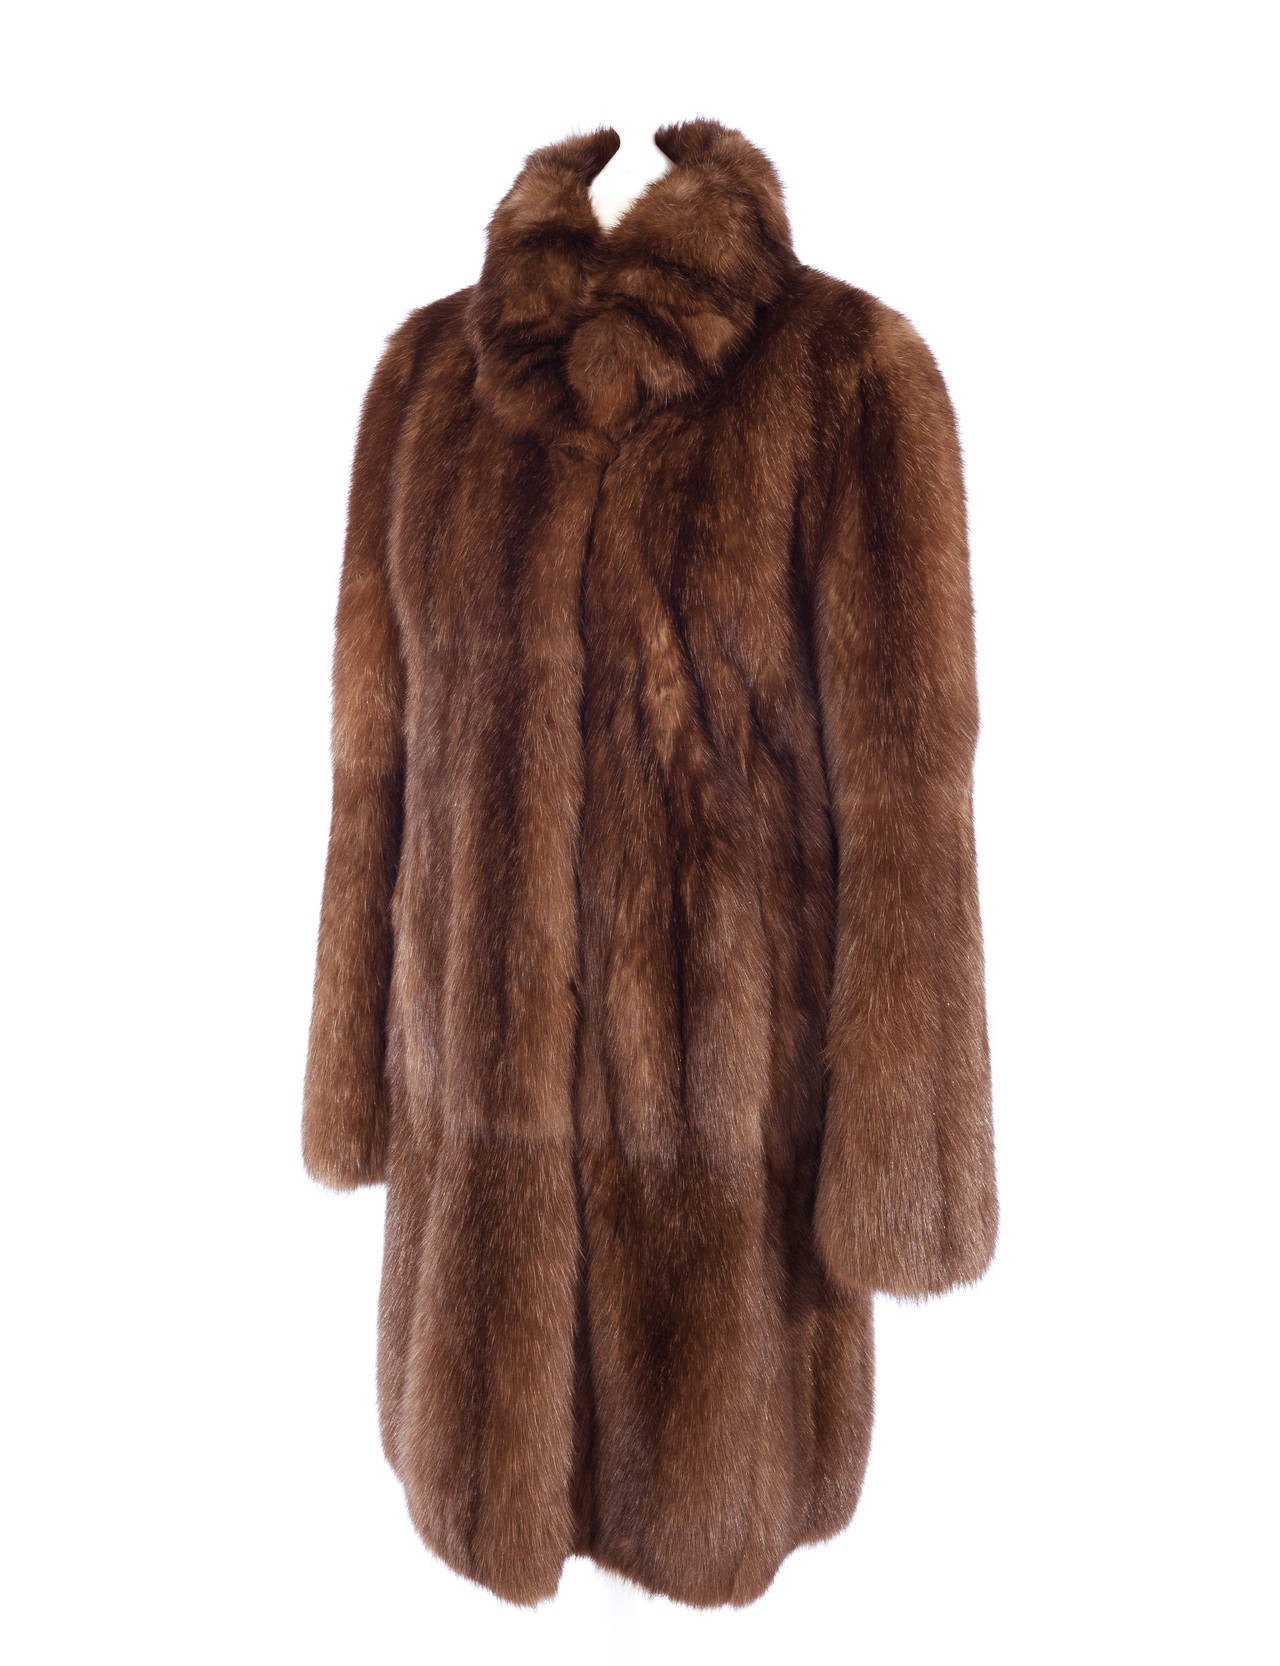 Slupinski Siberian white tipped sable fur coat. Sable fur is unique because it retains its smoothness in every direction it is stroked. The Coat has a basic shape with inside waist drawstring to make waist more fitted and elegant, drawstring at top